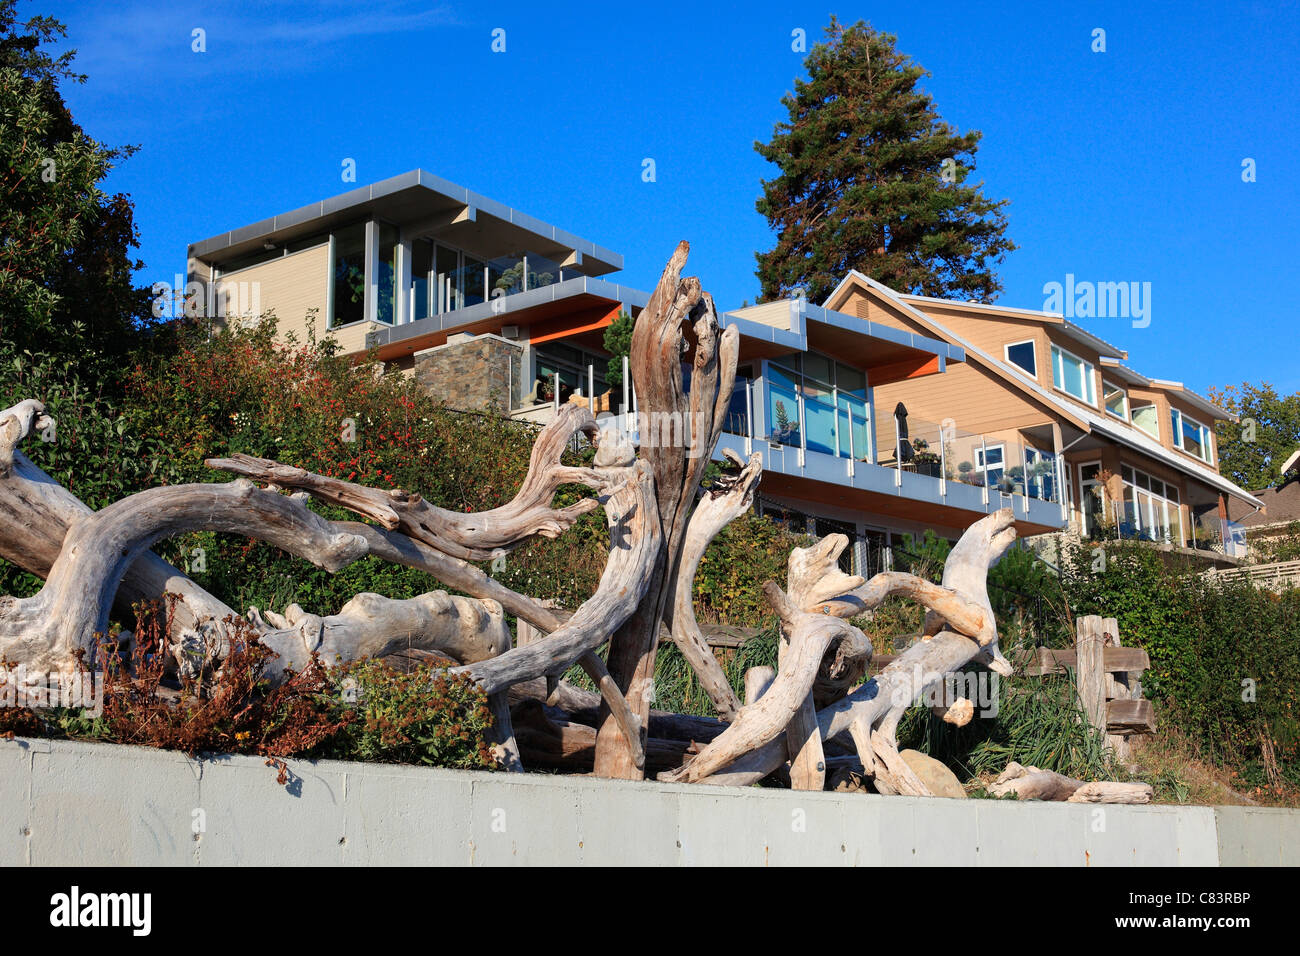 Driftwood art display in front of beach houses Stock Photo